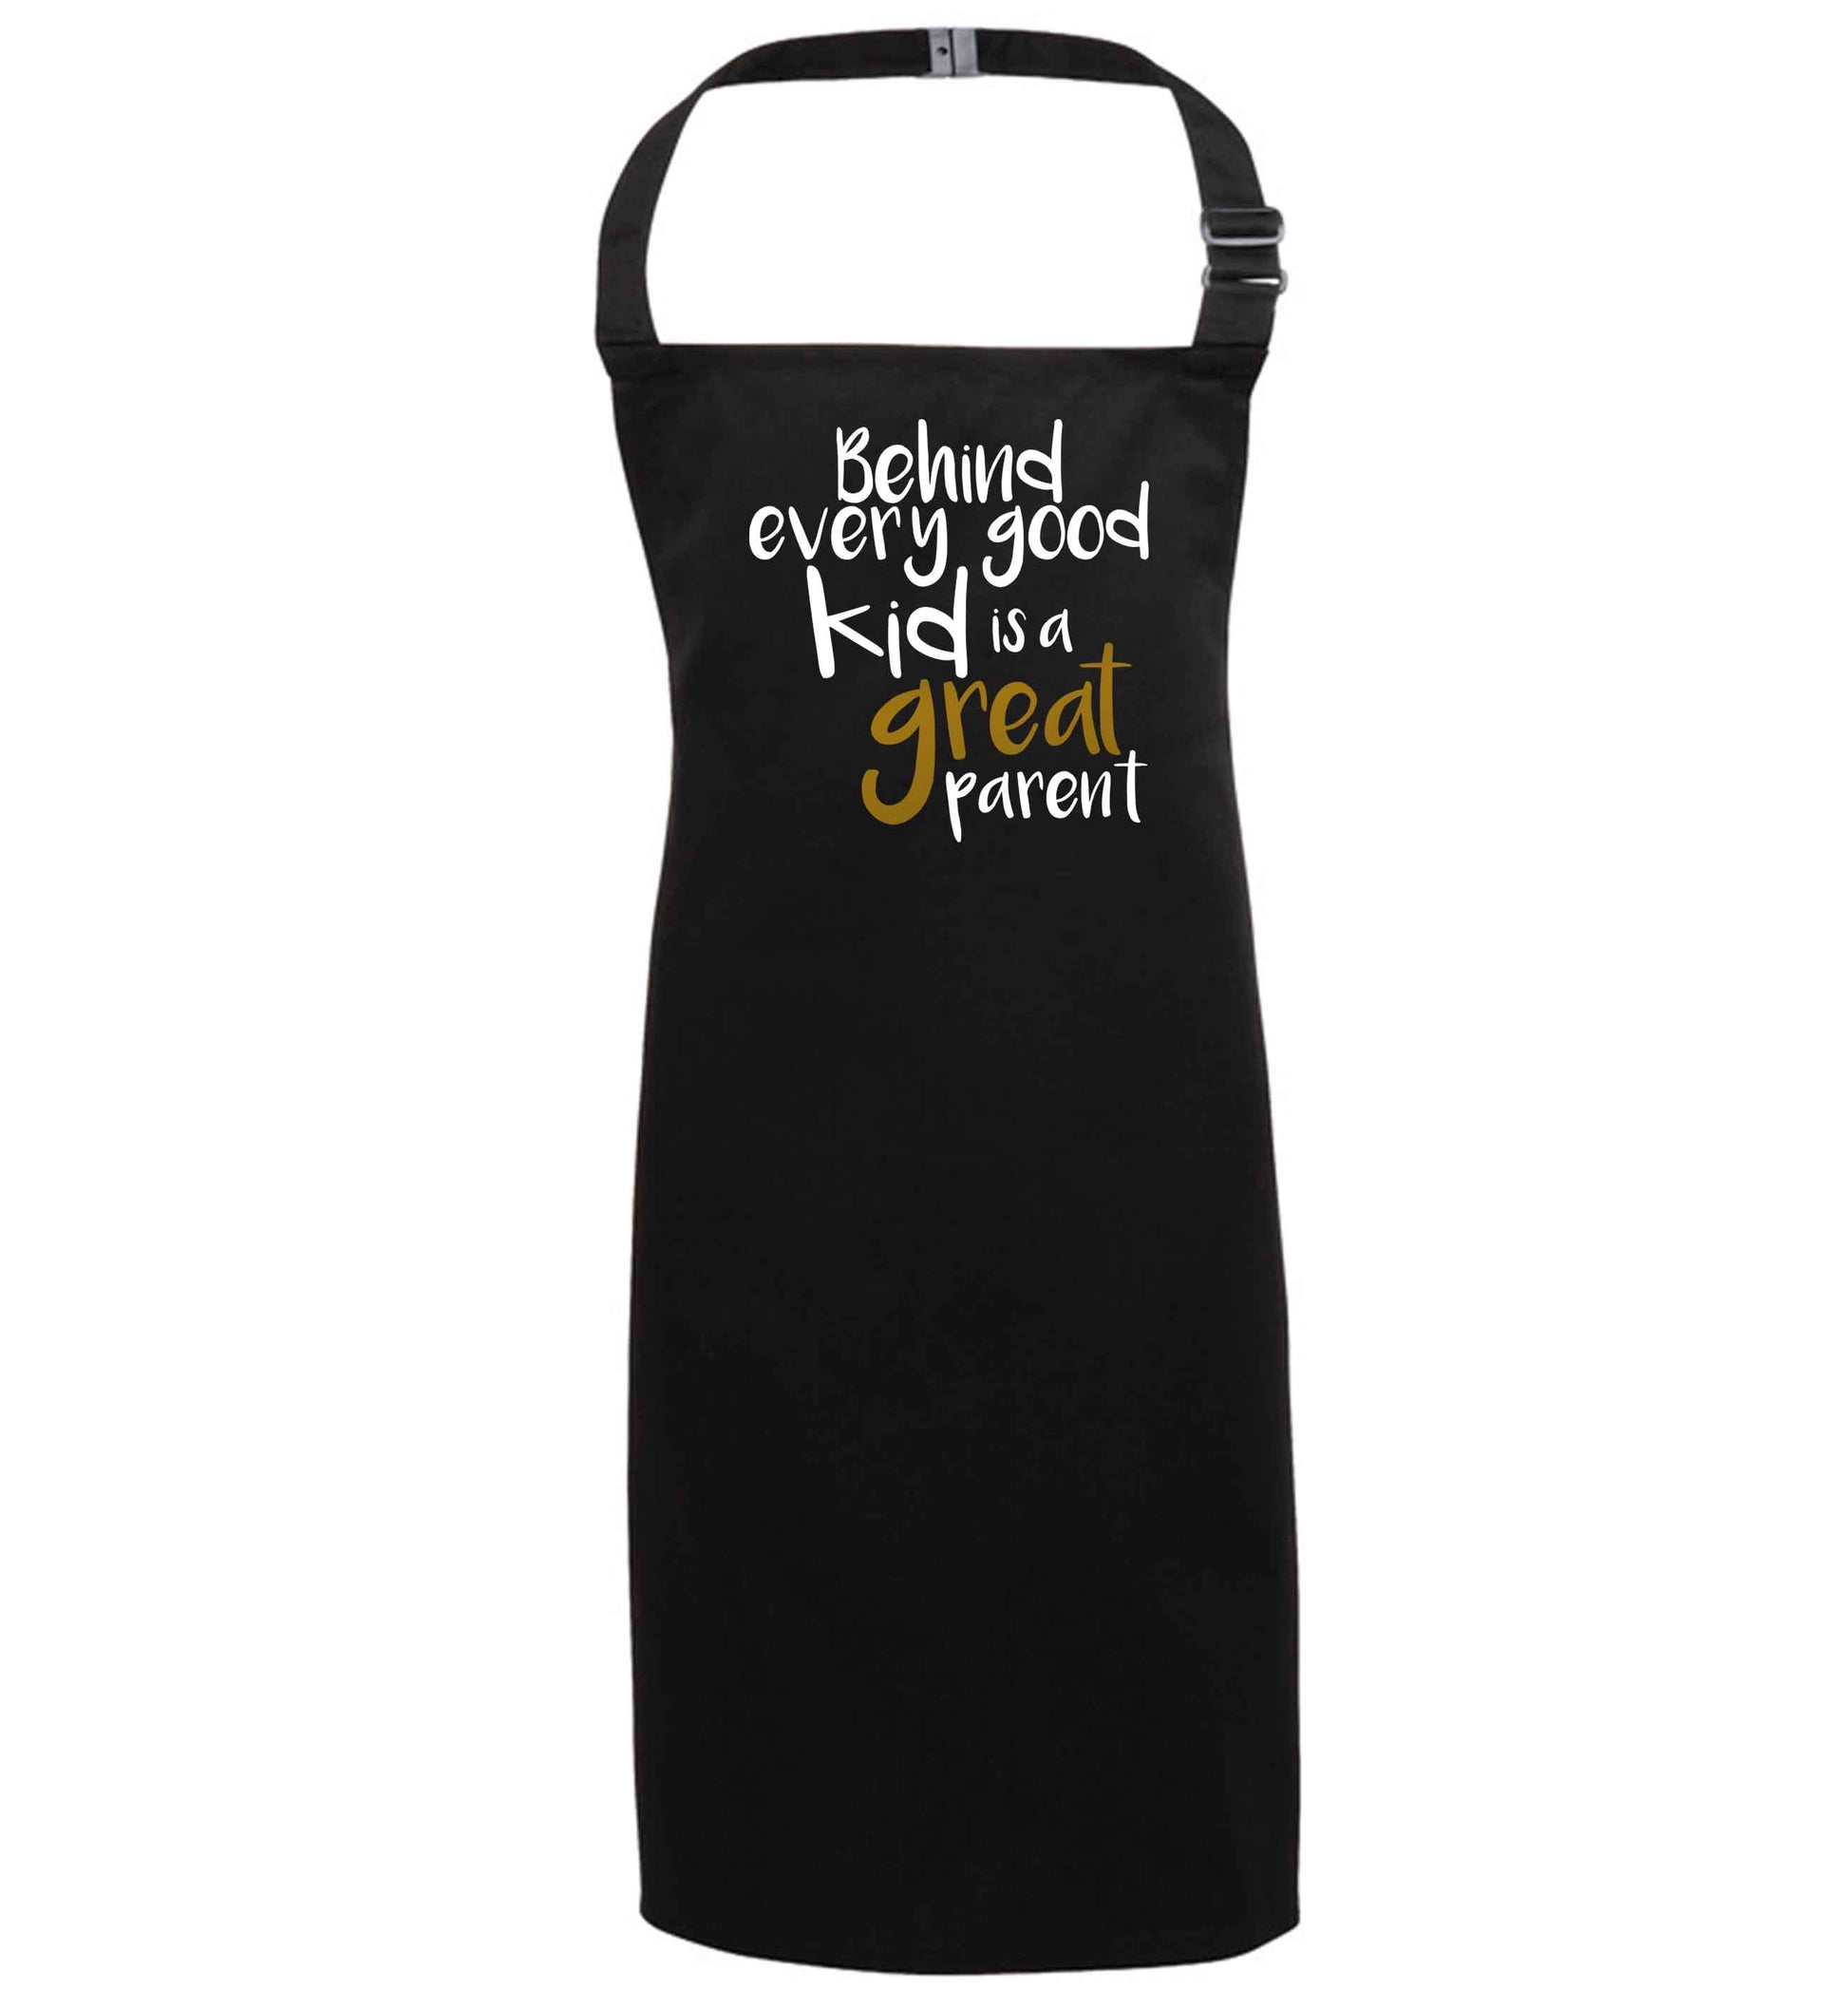 Behind every good kid is a great parent black apron 7-10 years